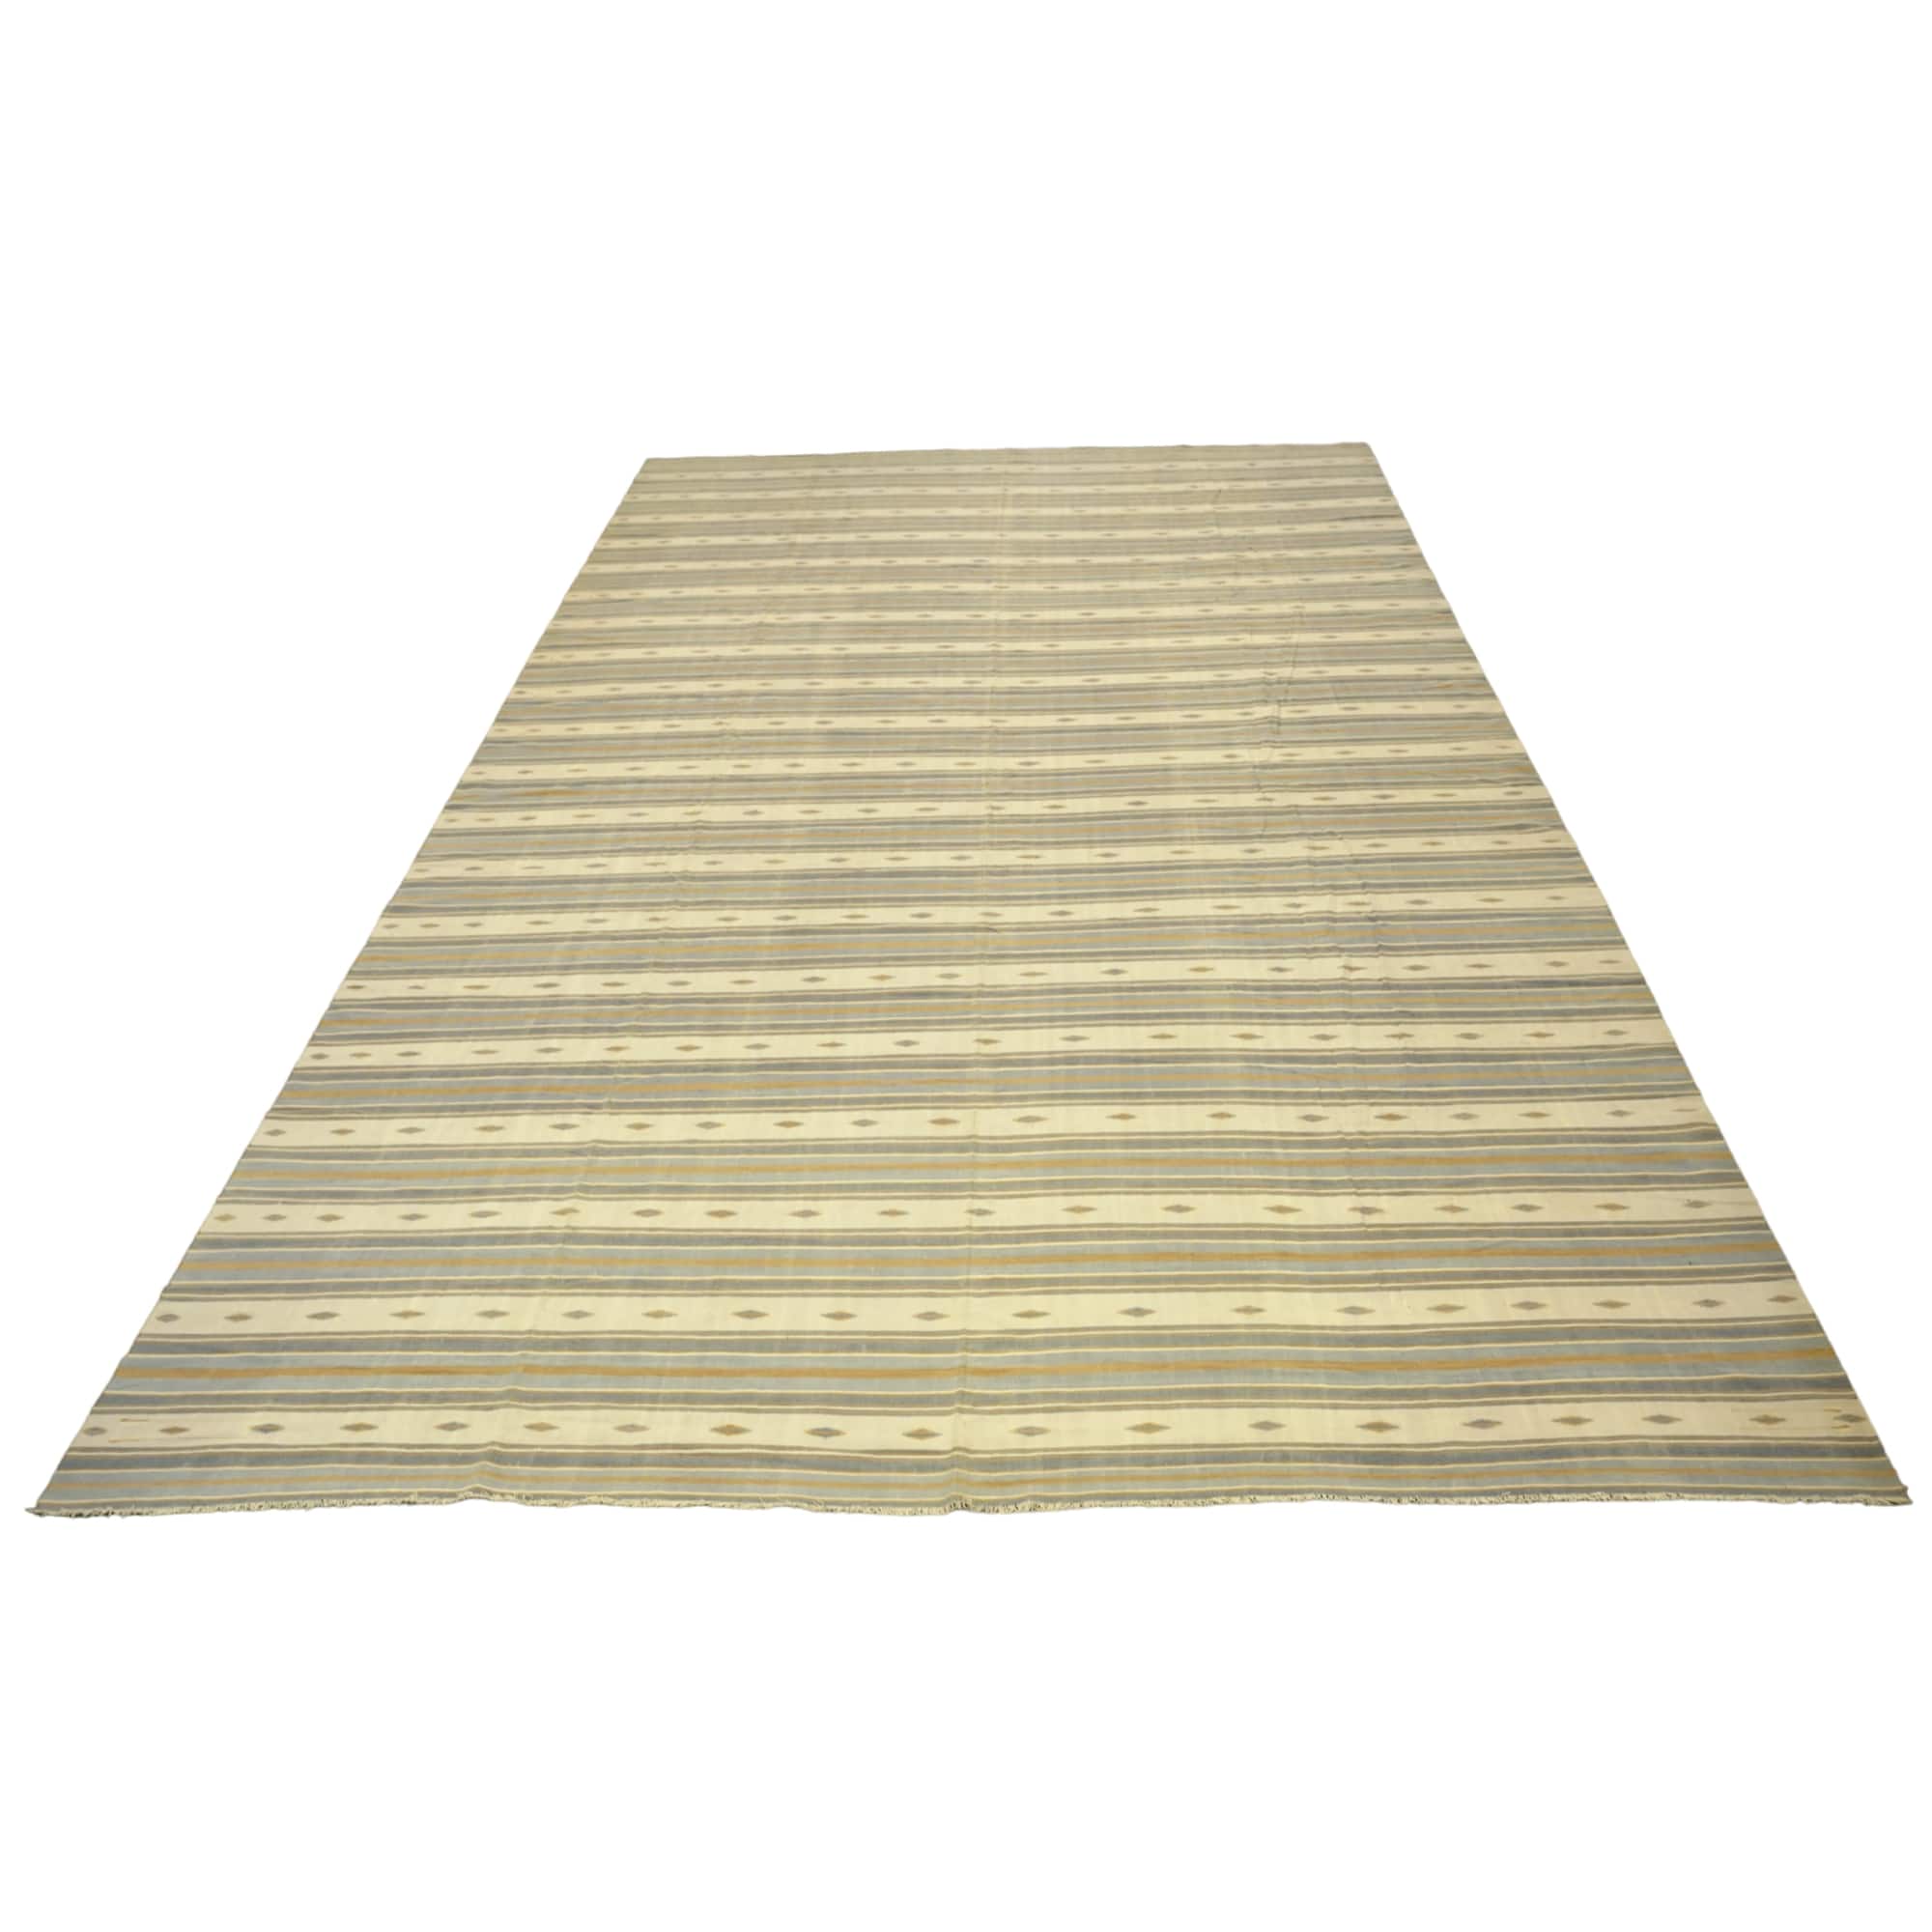 Vintage Dhurrie Rug in Beige-Brownwith Stripes, from Rug & Kilim For Sale